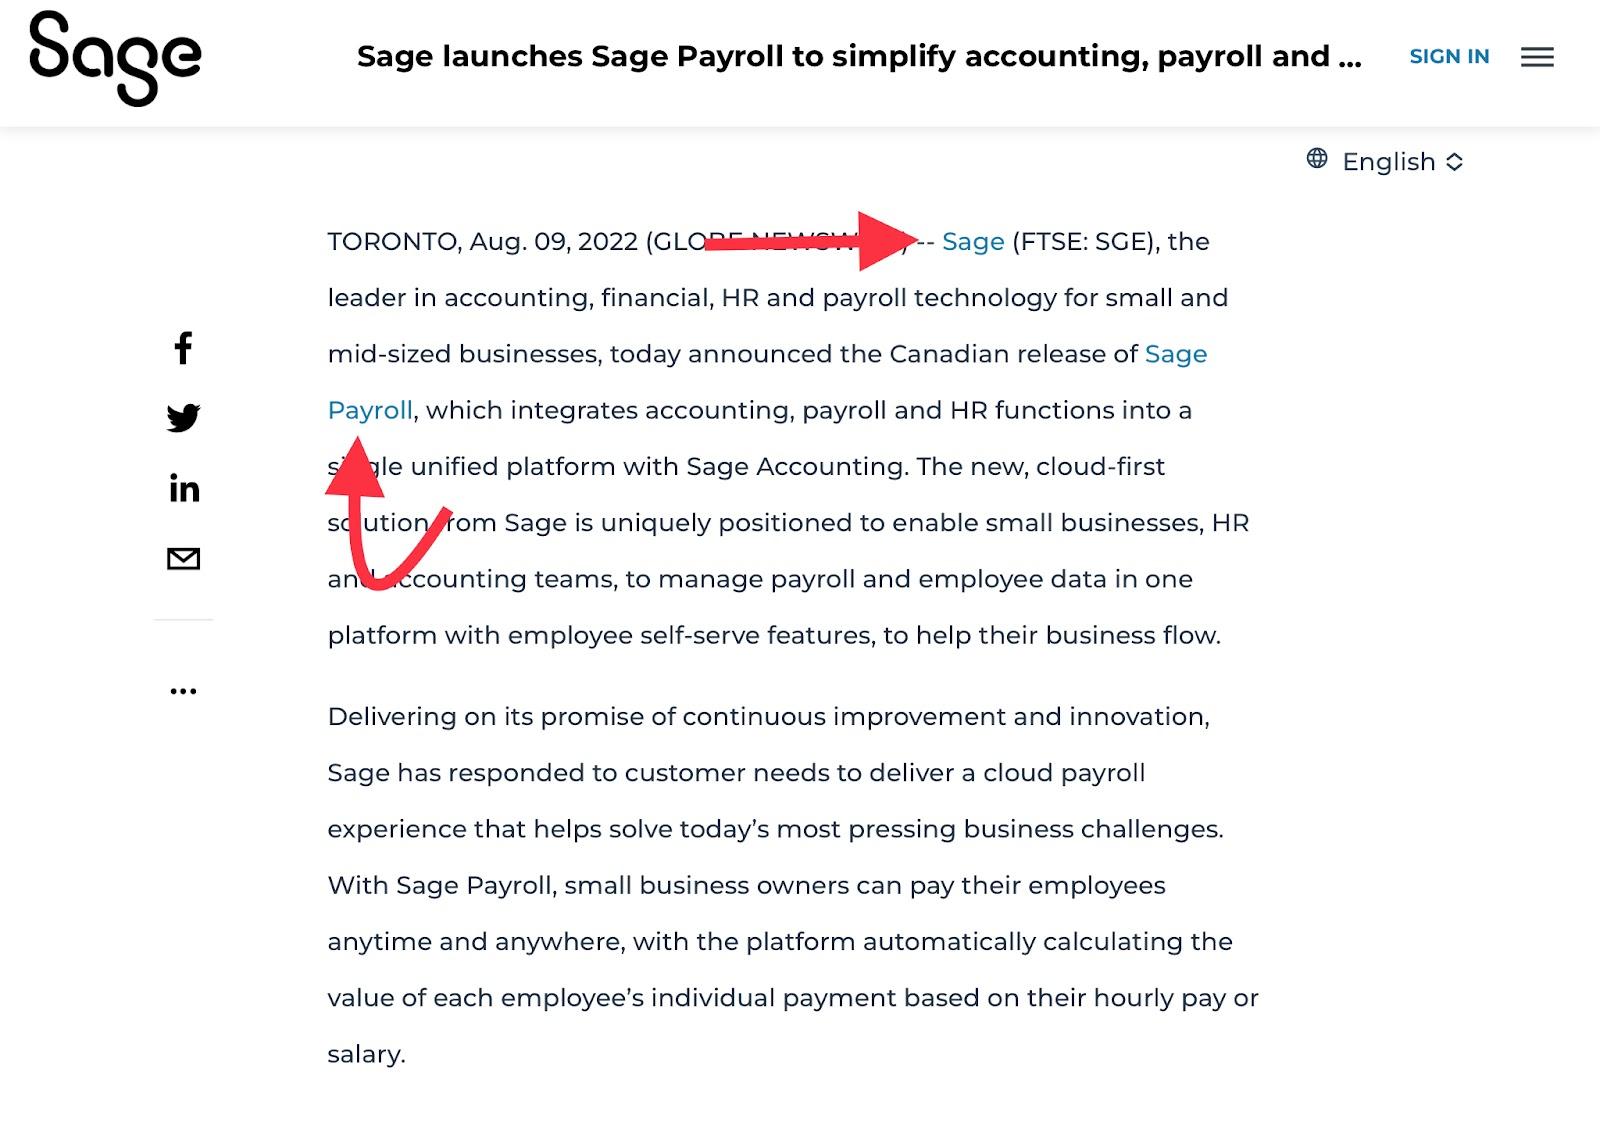 Sage launches Sage Payroll to simplify account, payroll and HR functions into a single unified platform